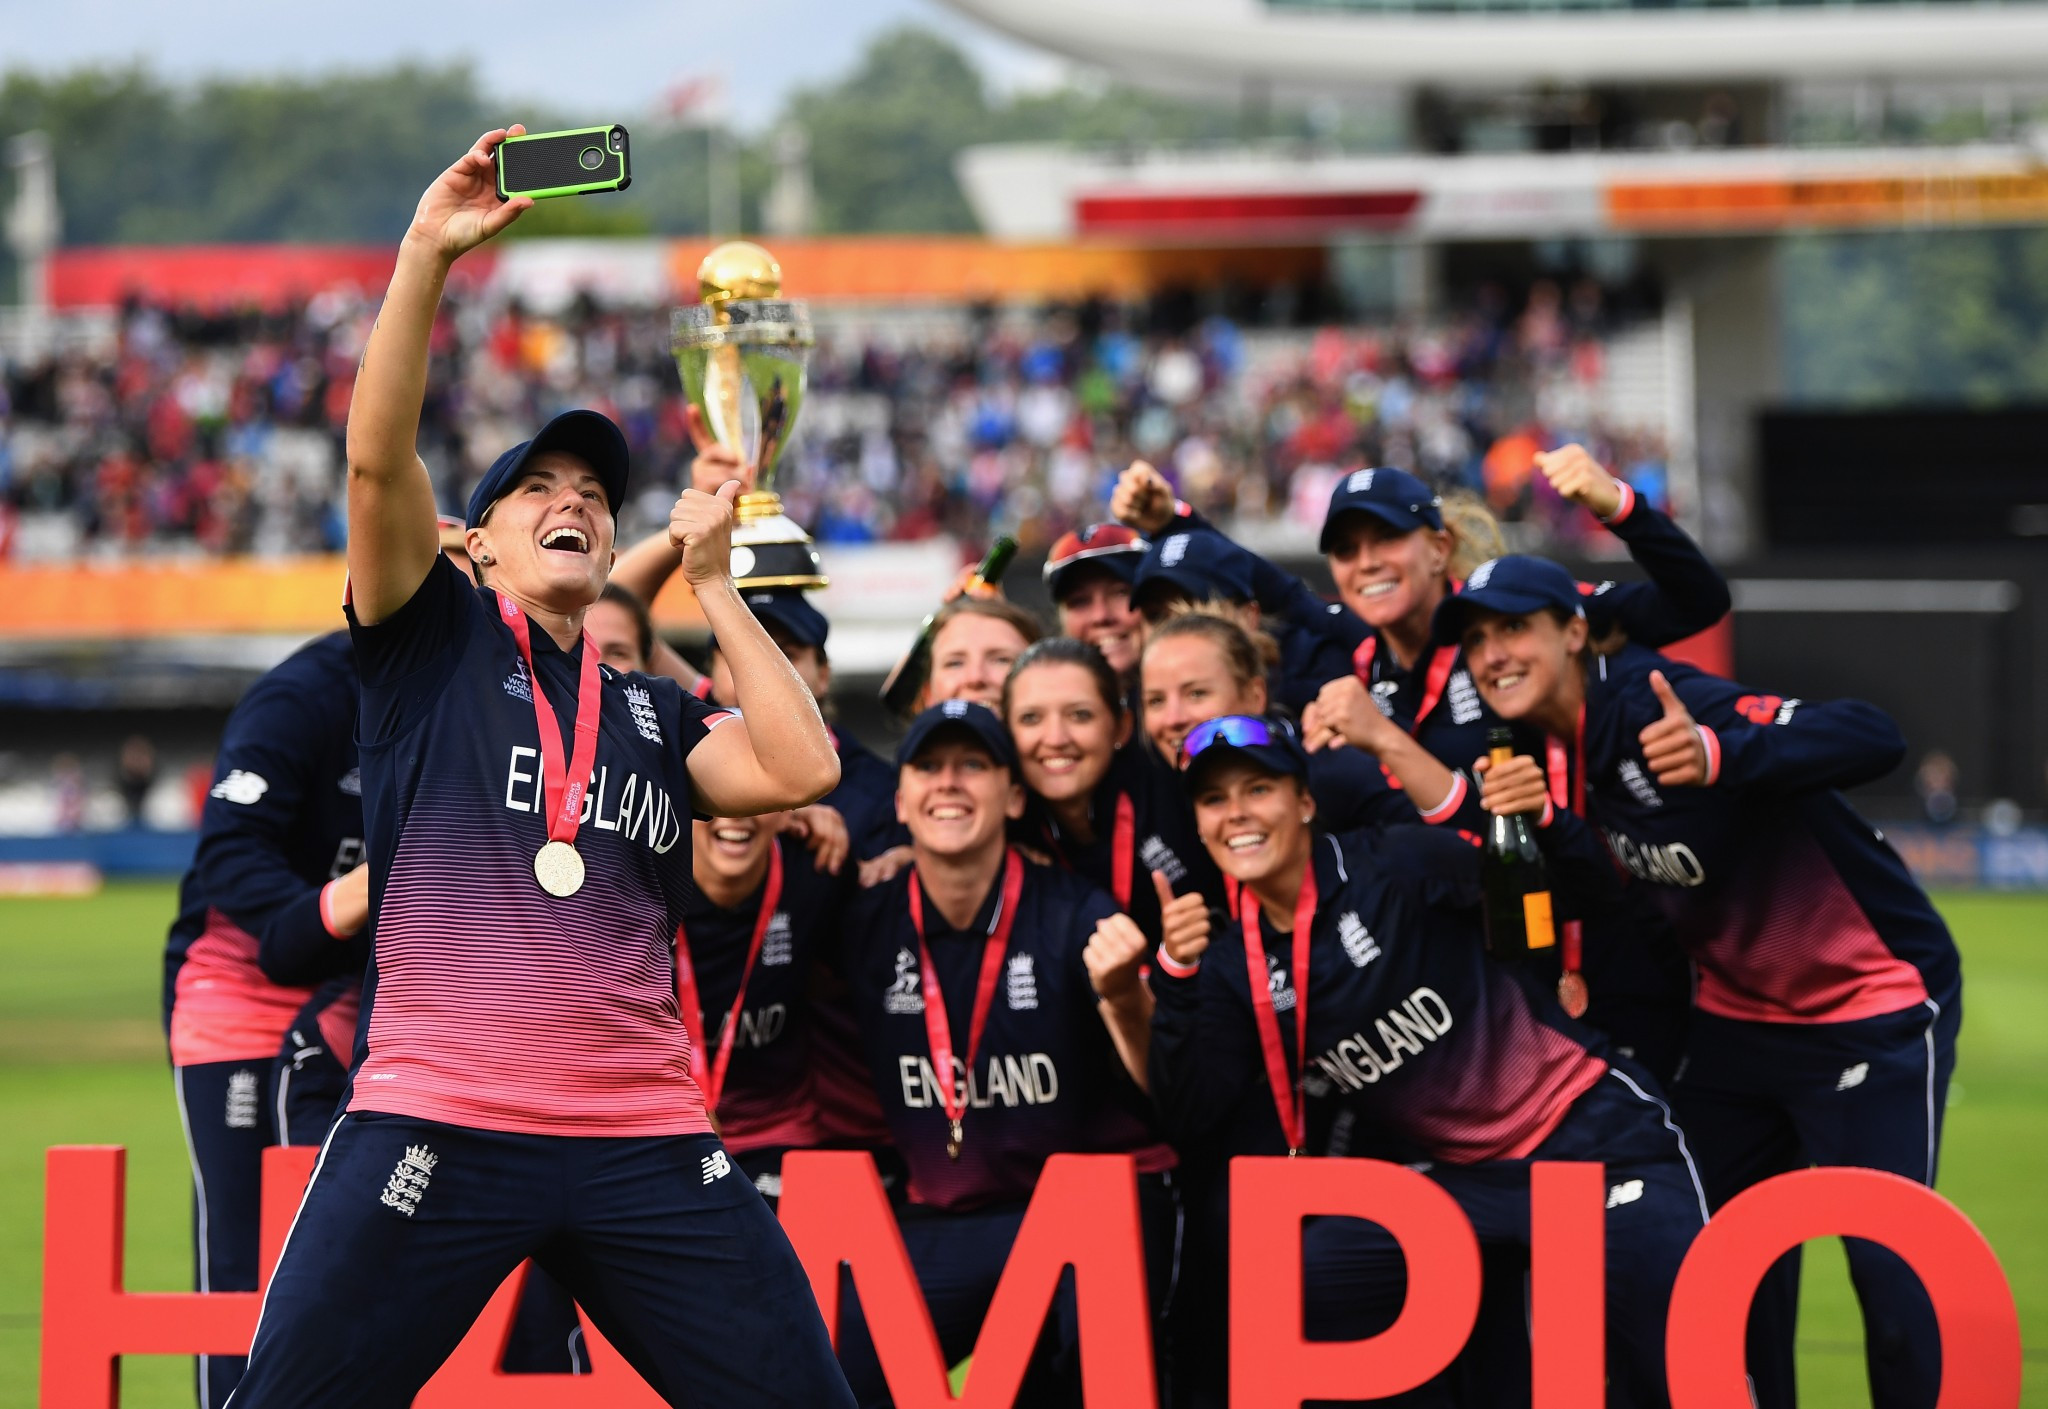 The ICC say the total viewing hours during the Women's World Cup increased by 300 per cent ©Getty Images